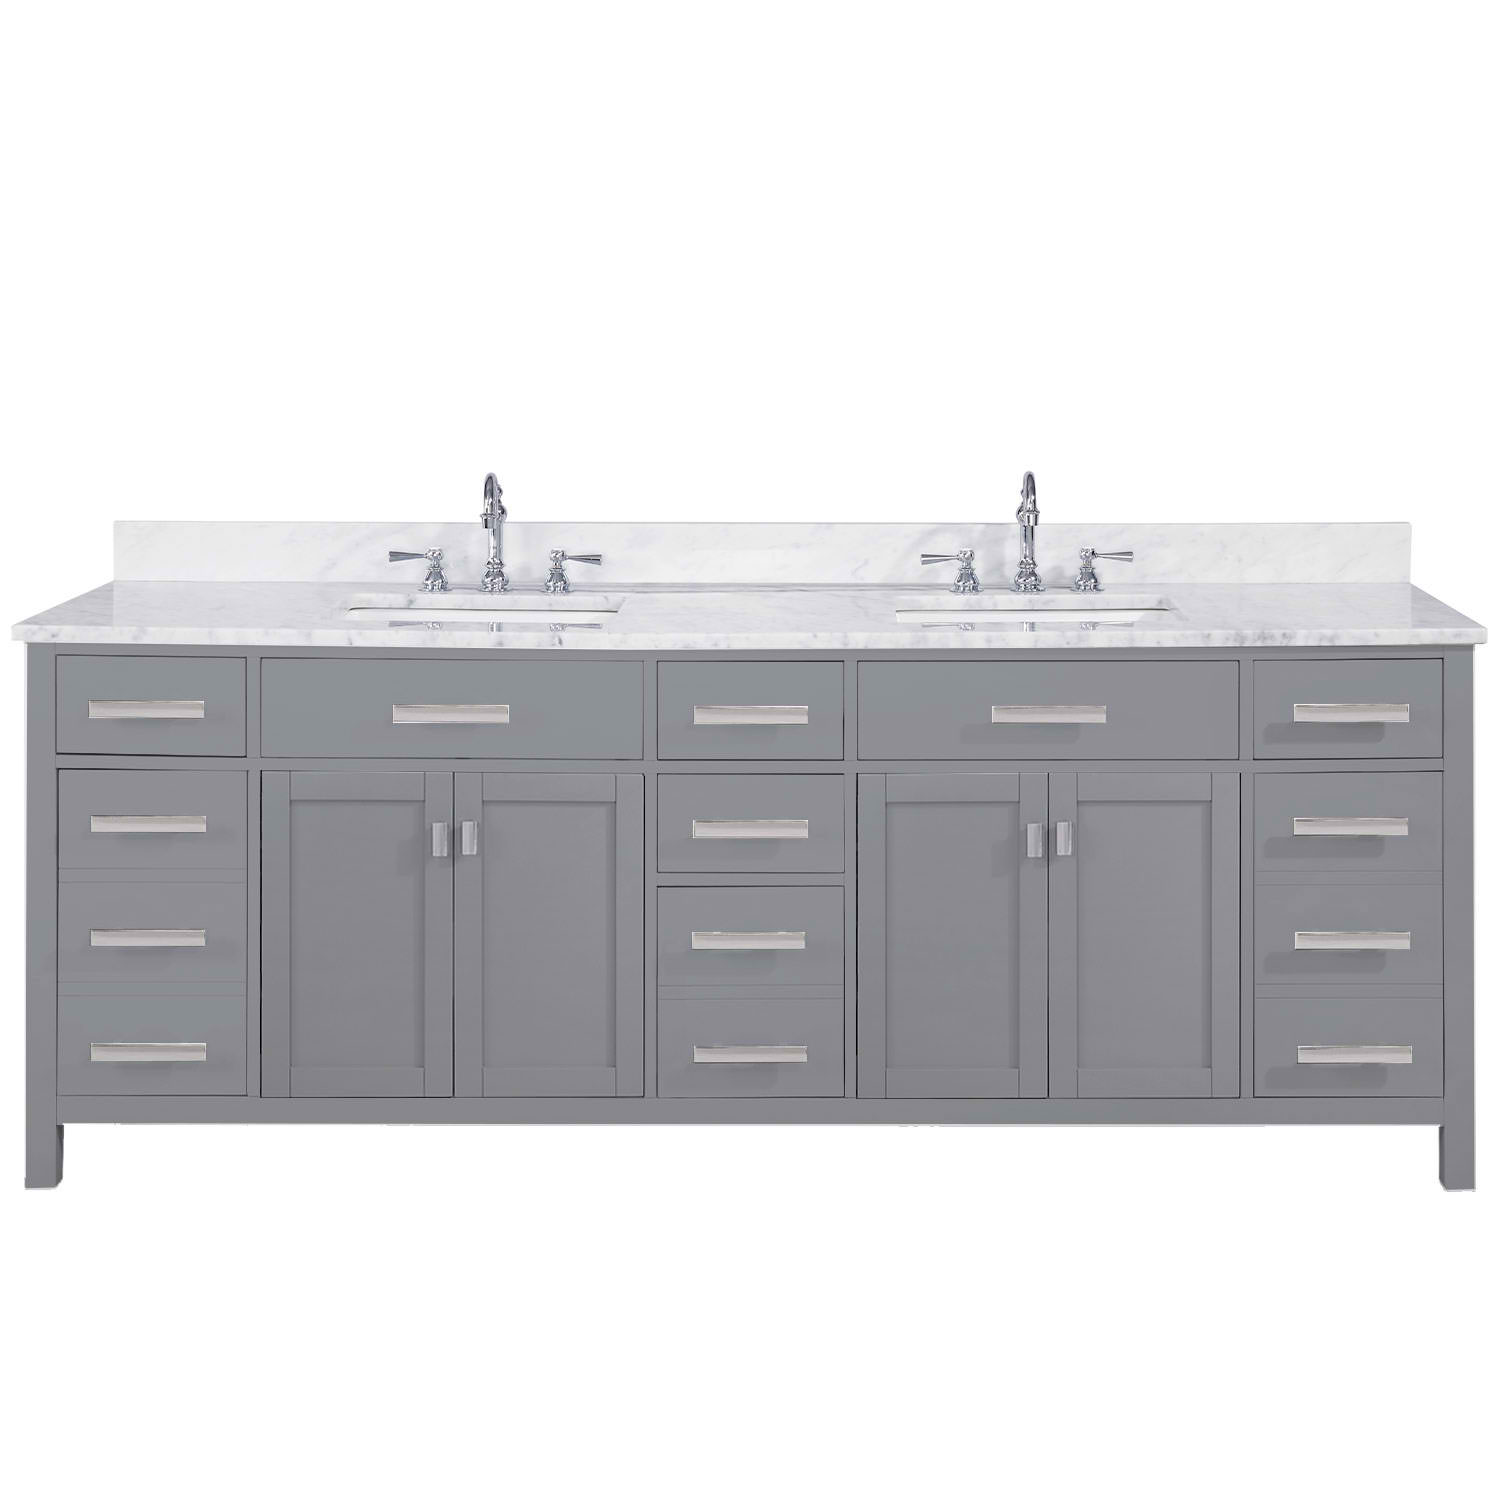 Modern 84" Double Sink Vanity with Carrara Marble Counterop in Gray Finish